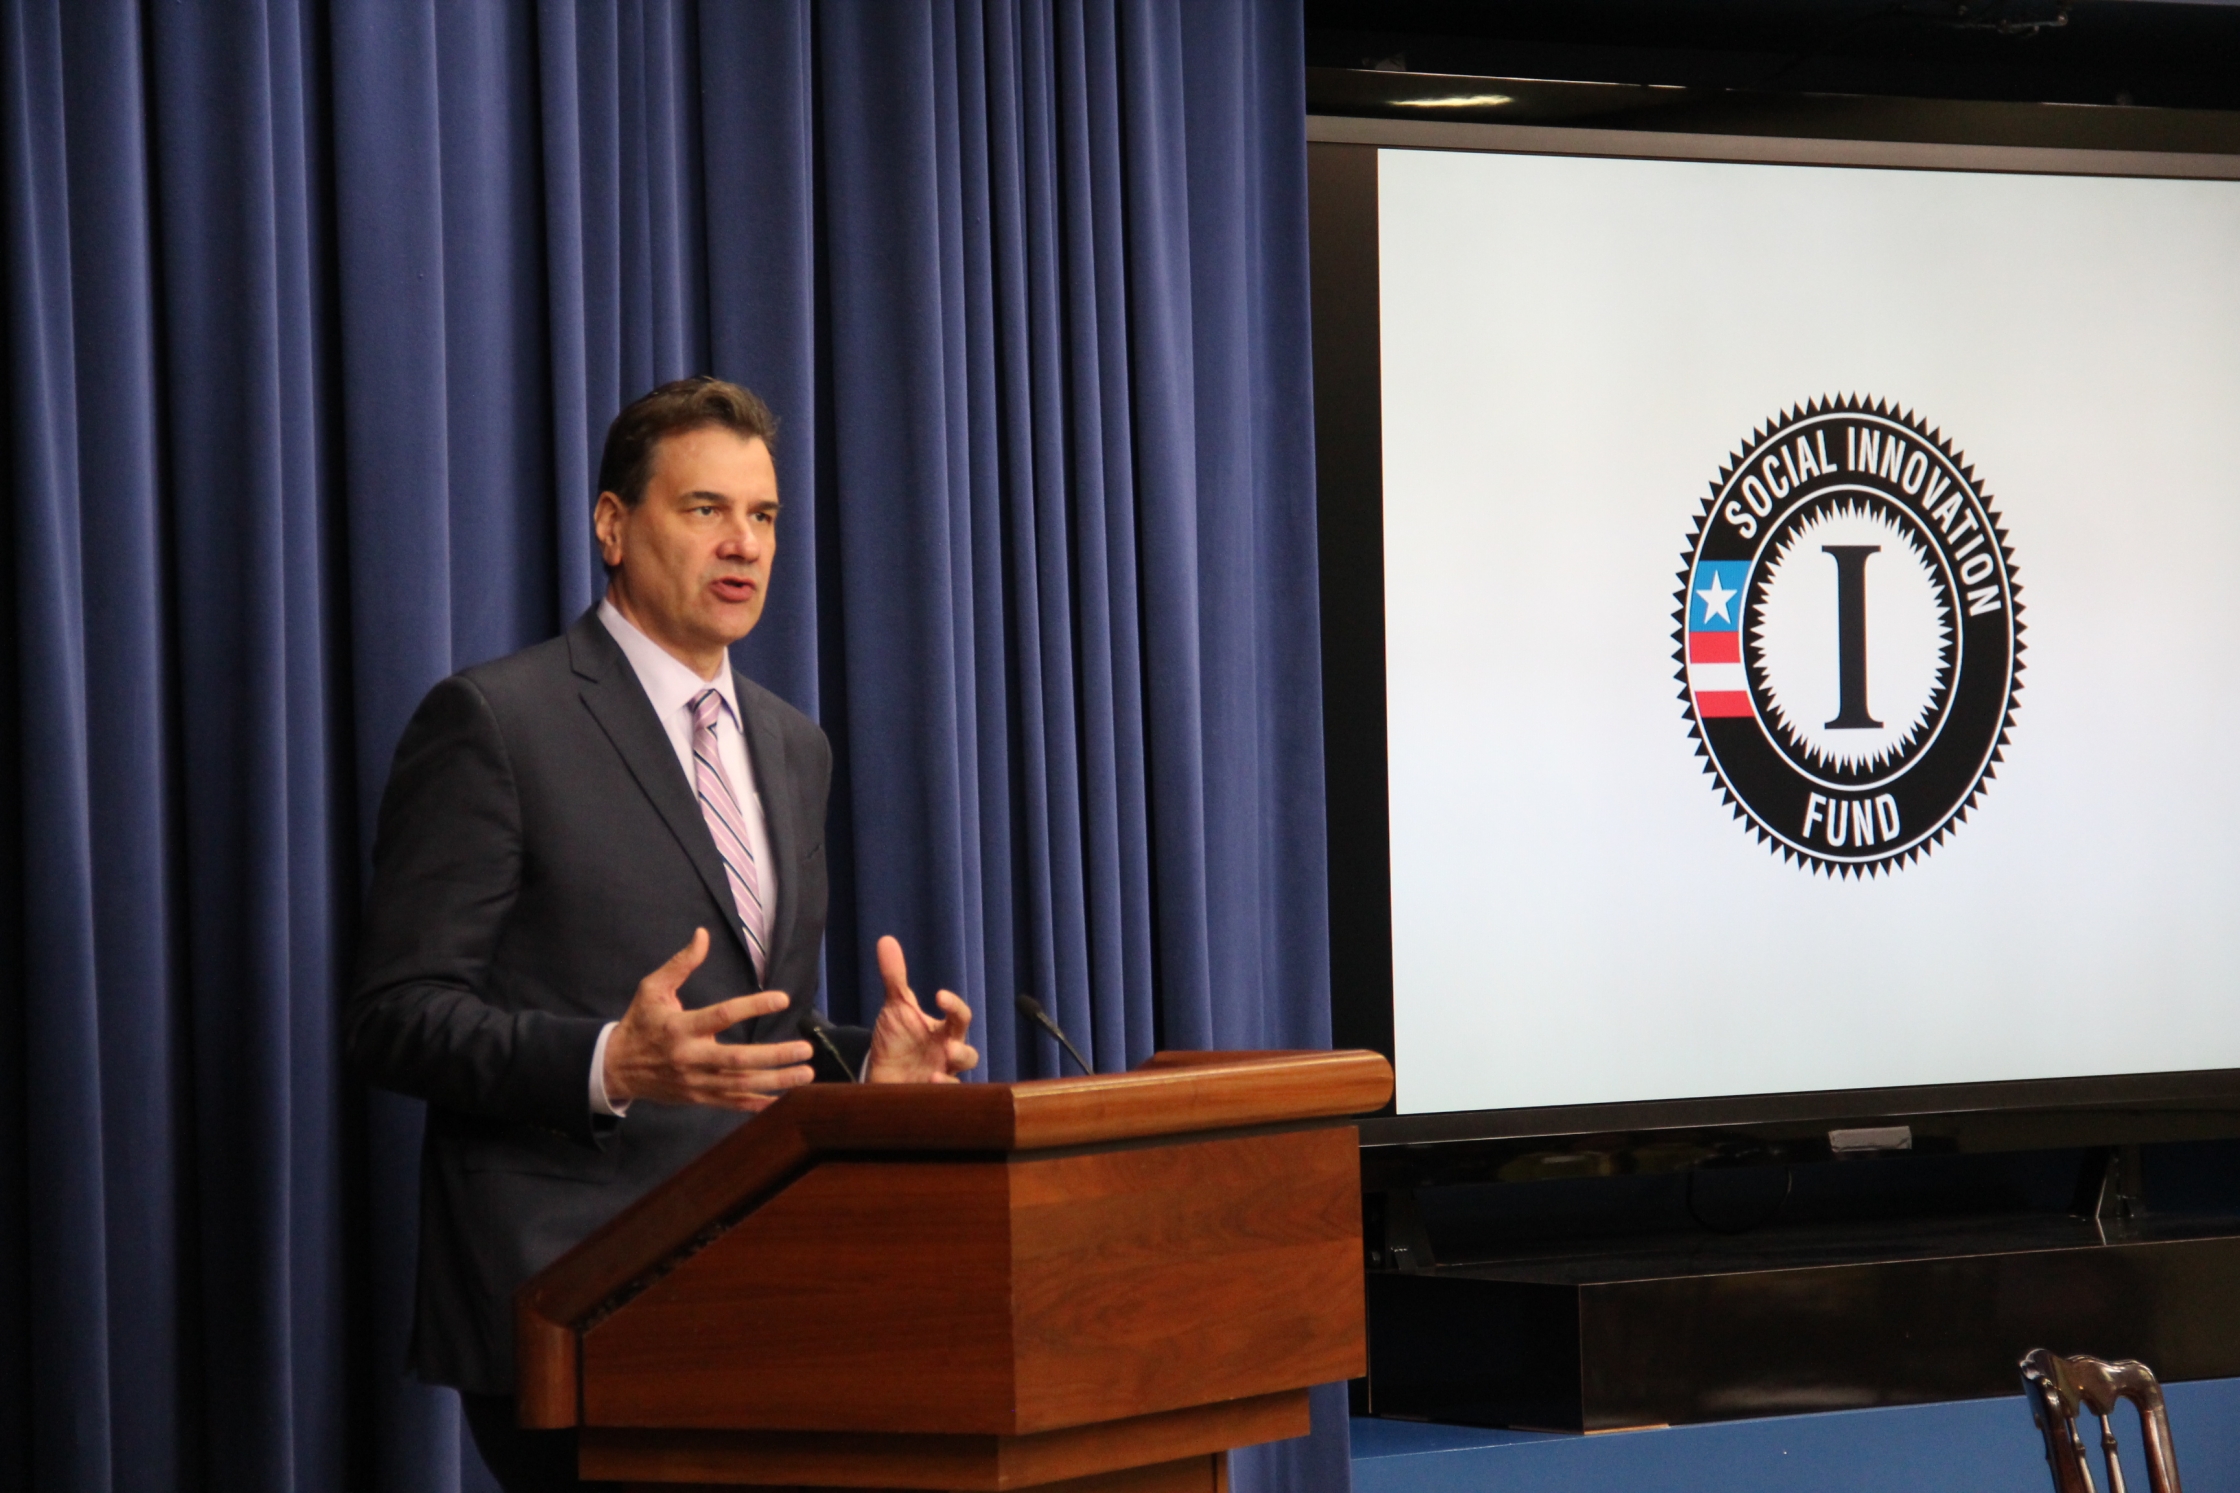 Damian Thorman, Director of the Social Innovation Fund, speaks at the White House on March 18, 2016 on the program's accomplishments